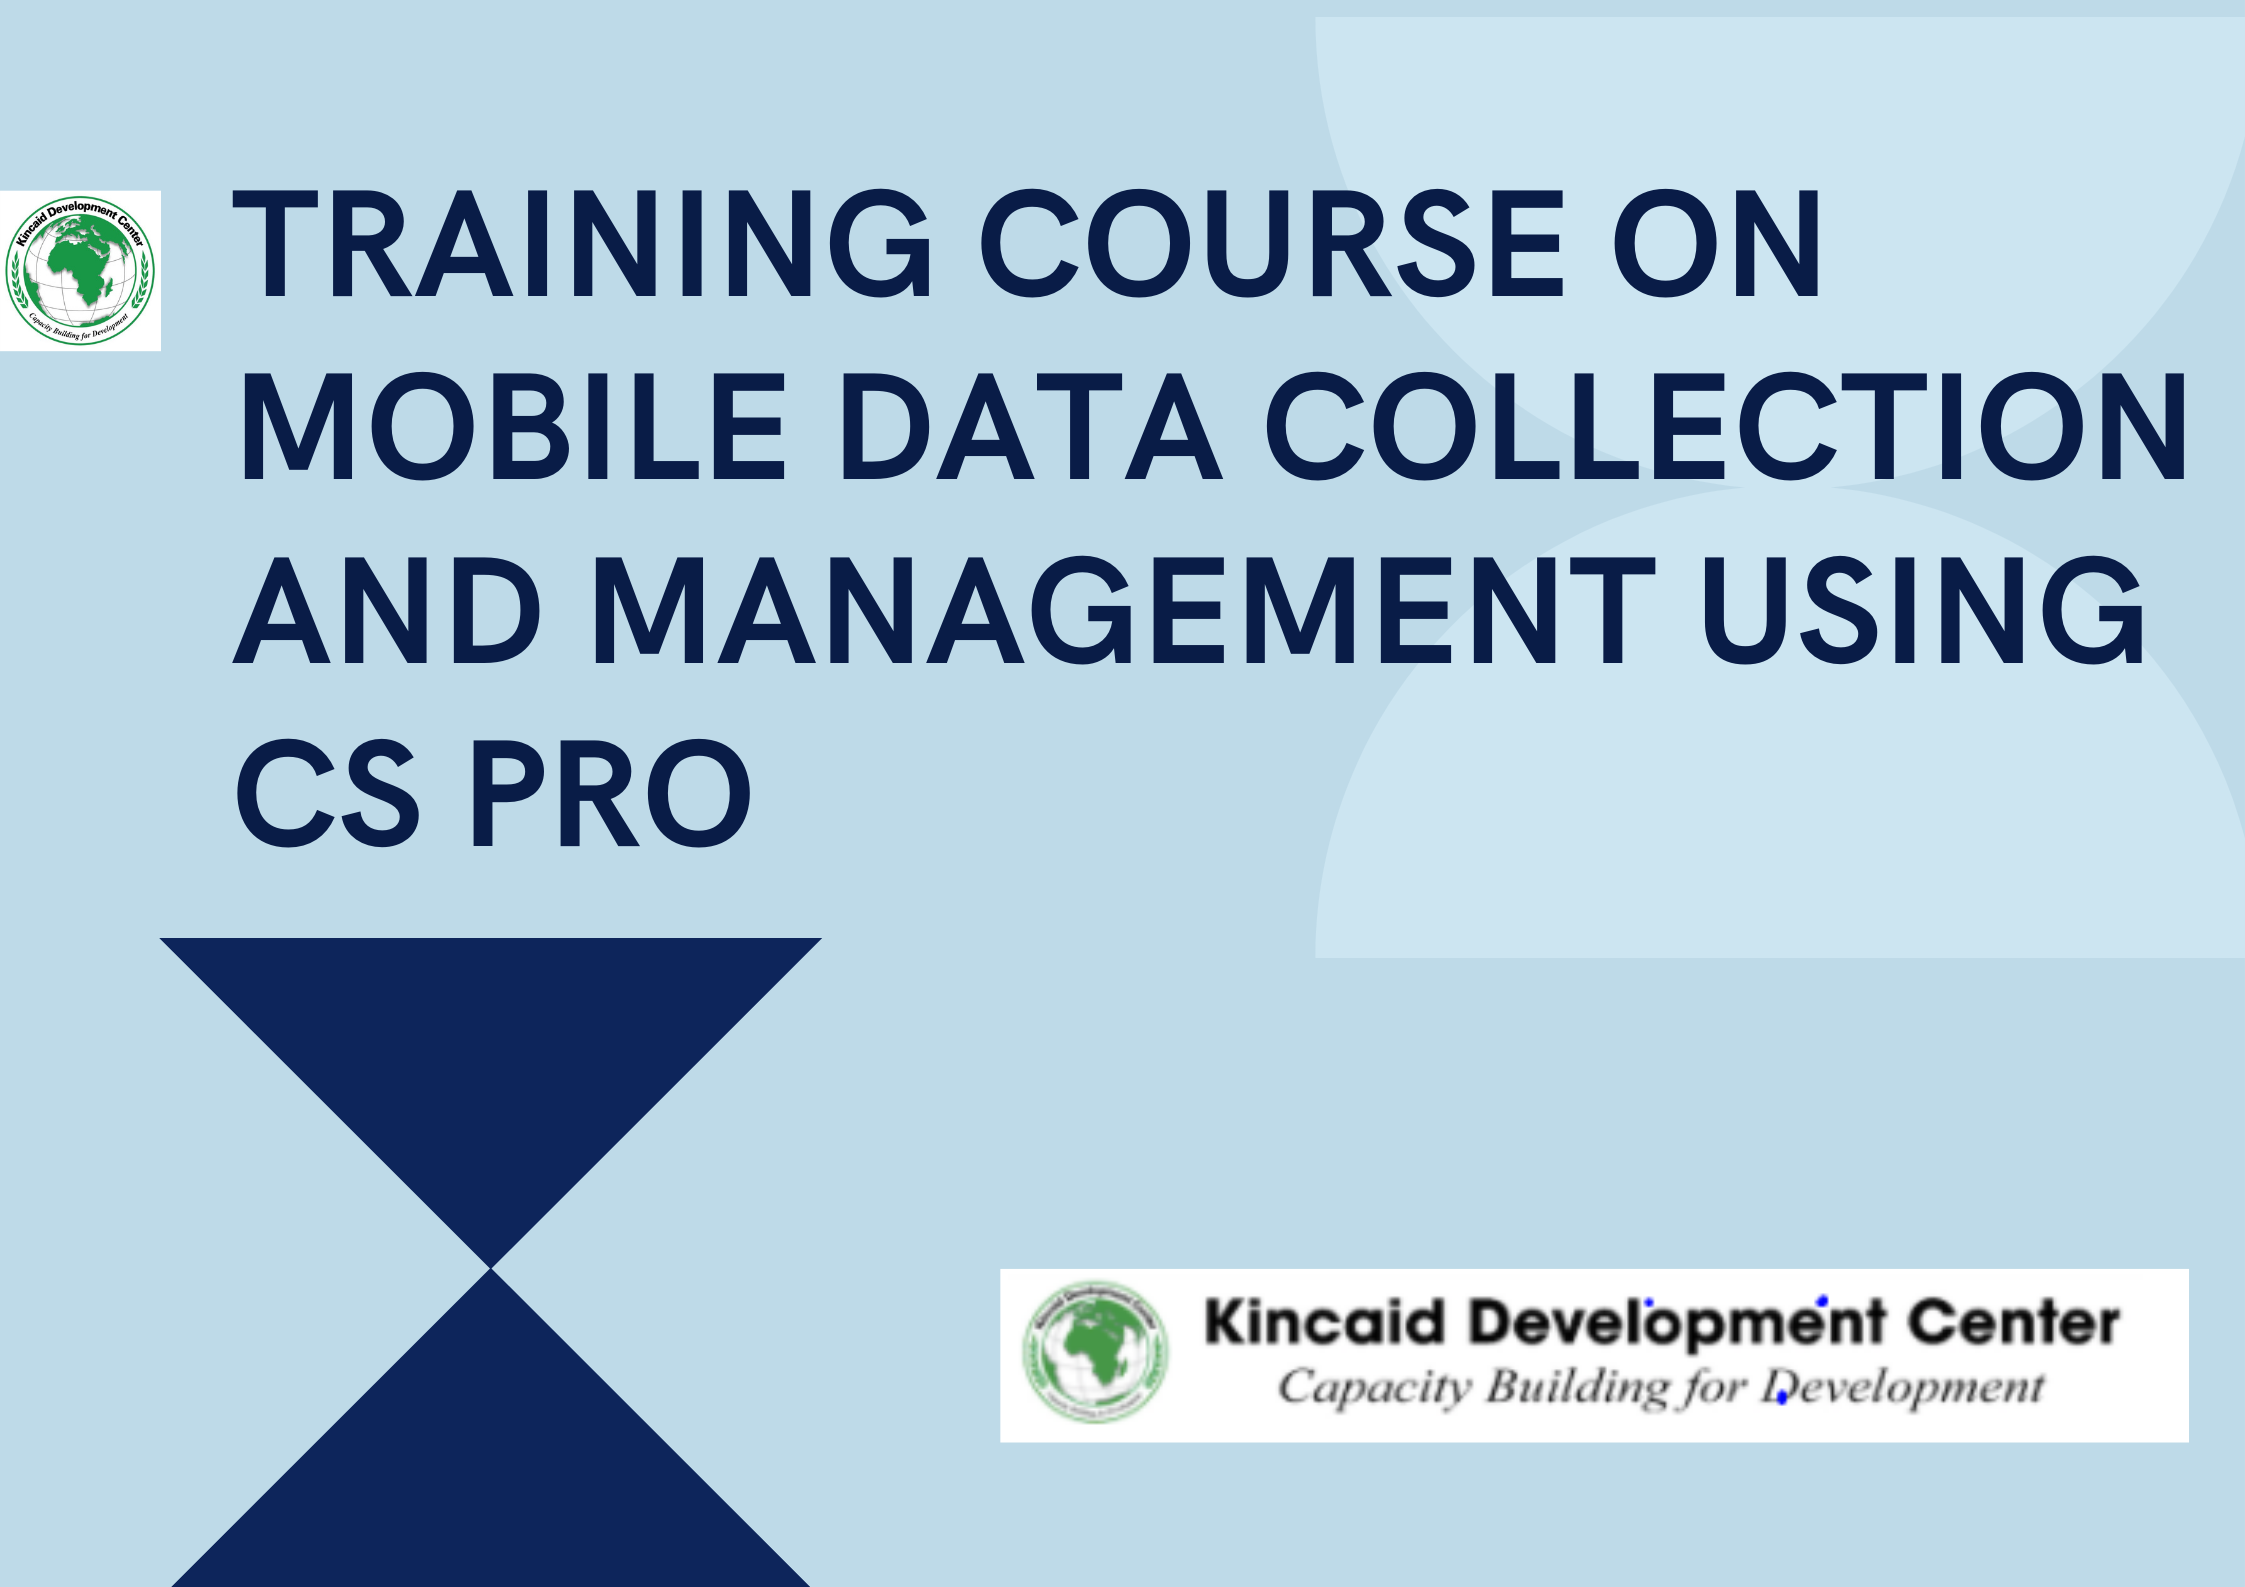 TRAINING COURSE ON MOBILE DATA COLLECTION AND MANAGEMENT USING CS PRO, Nairobi, Kenya